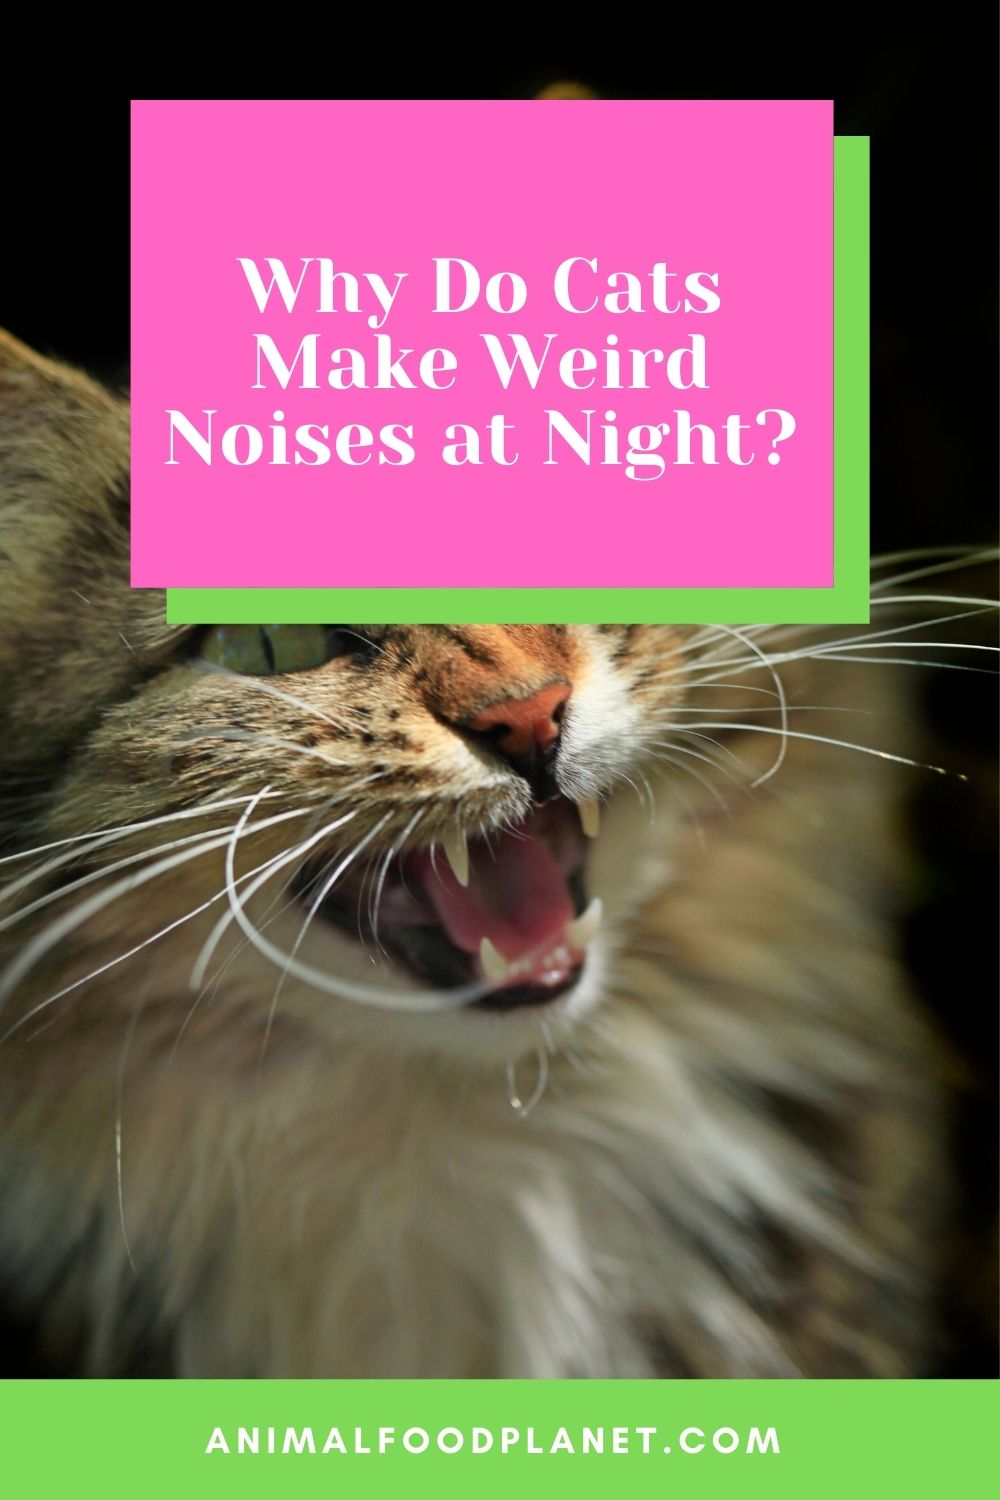 Why Do Cats Make Weird Noises at Night?